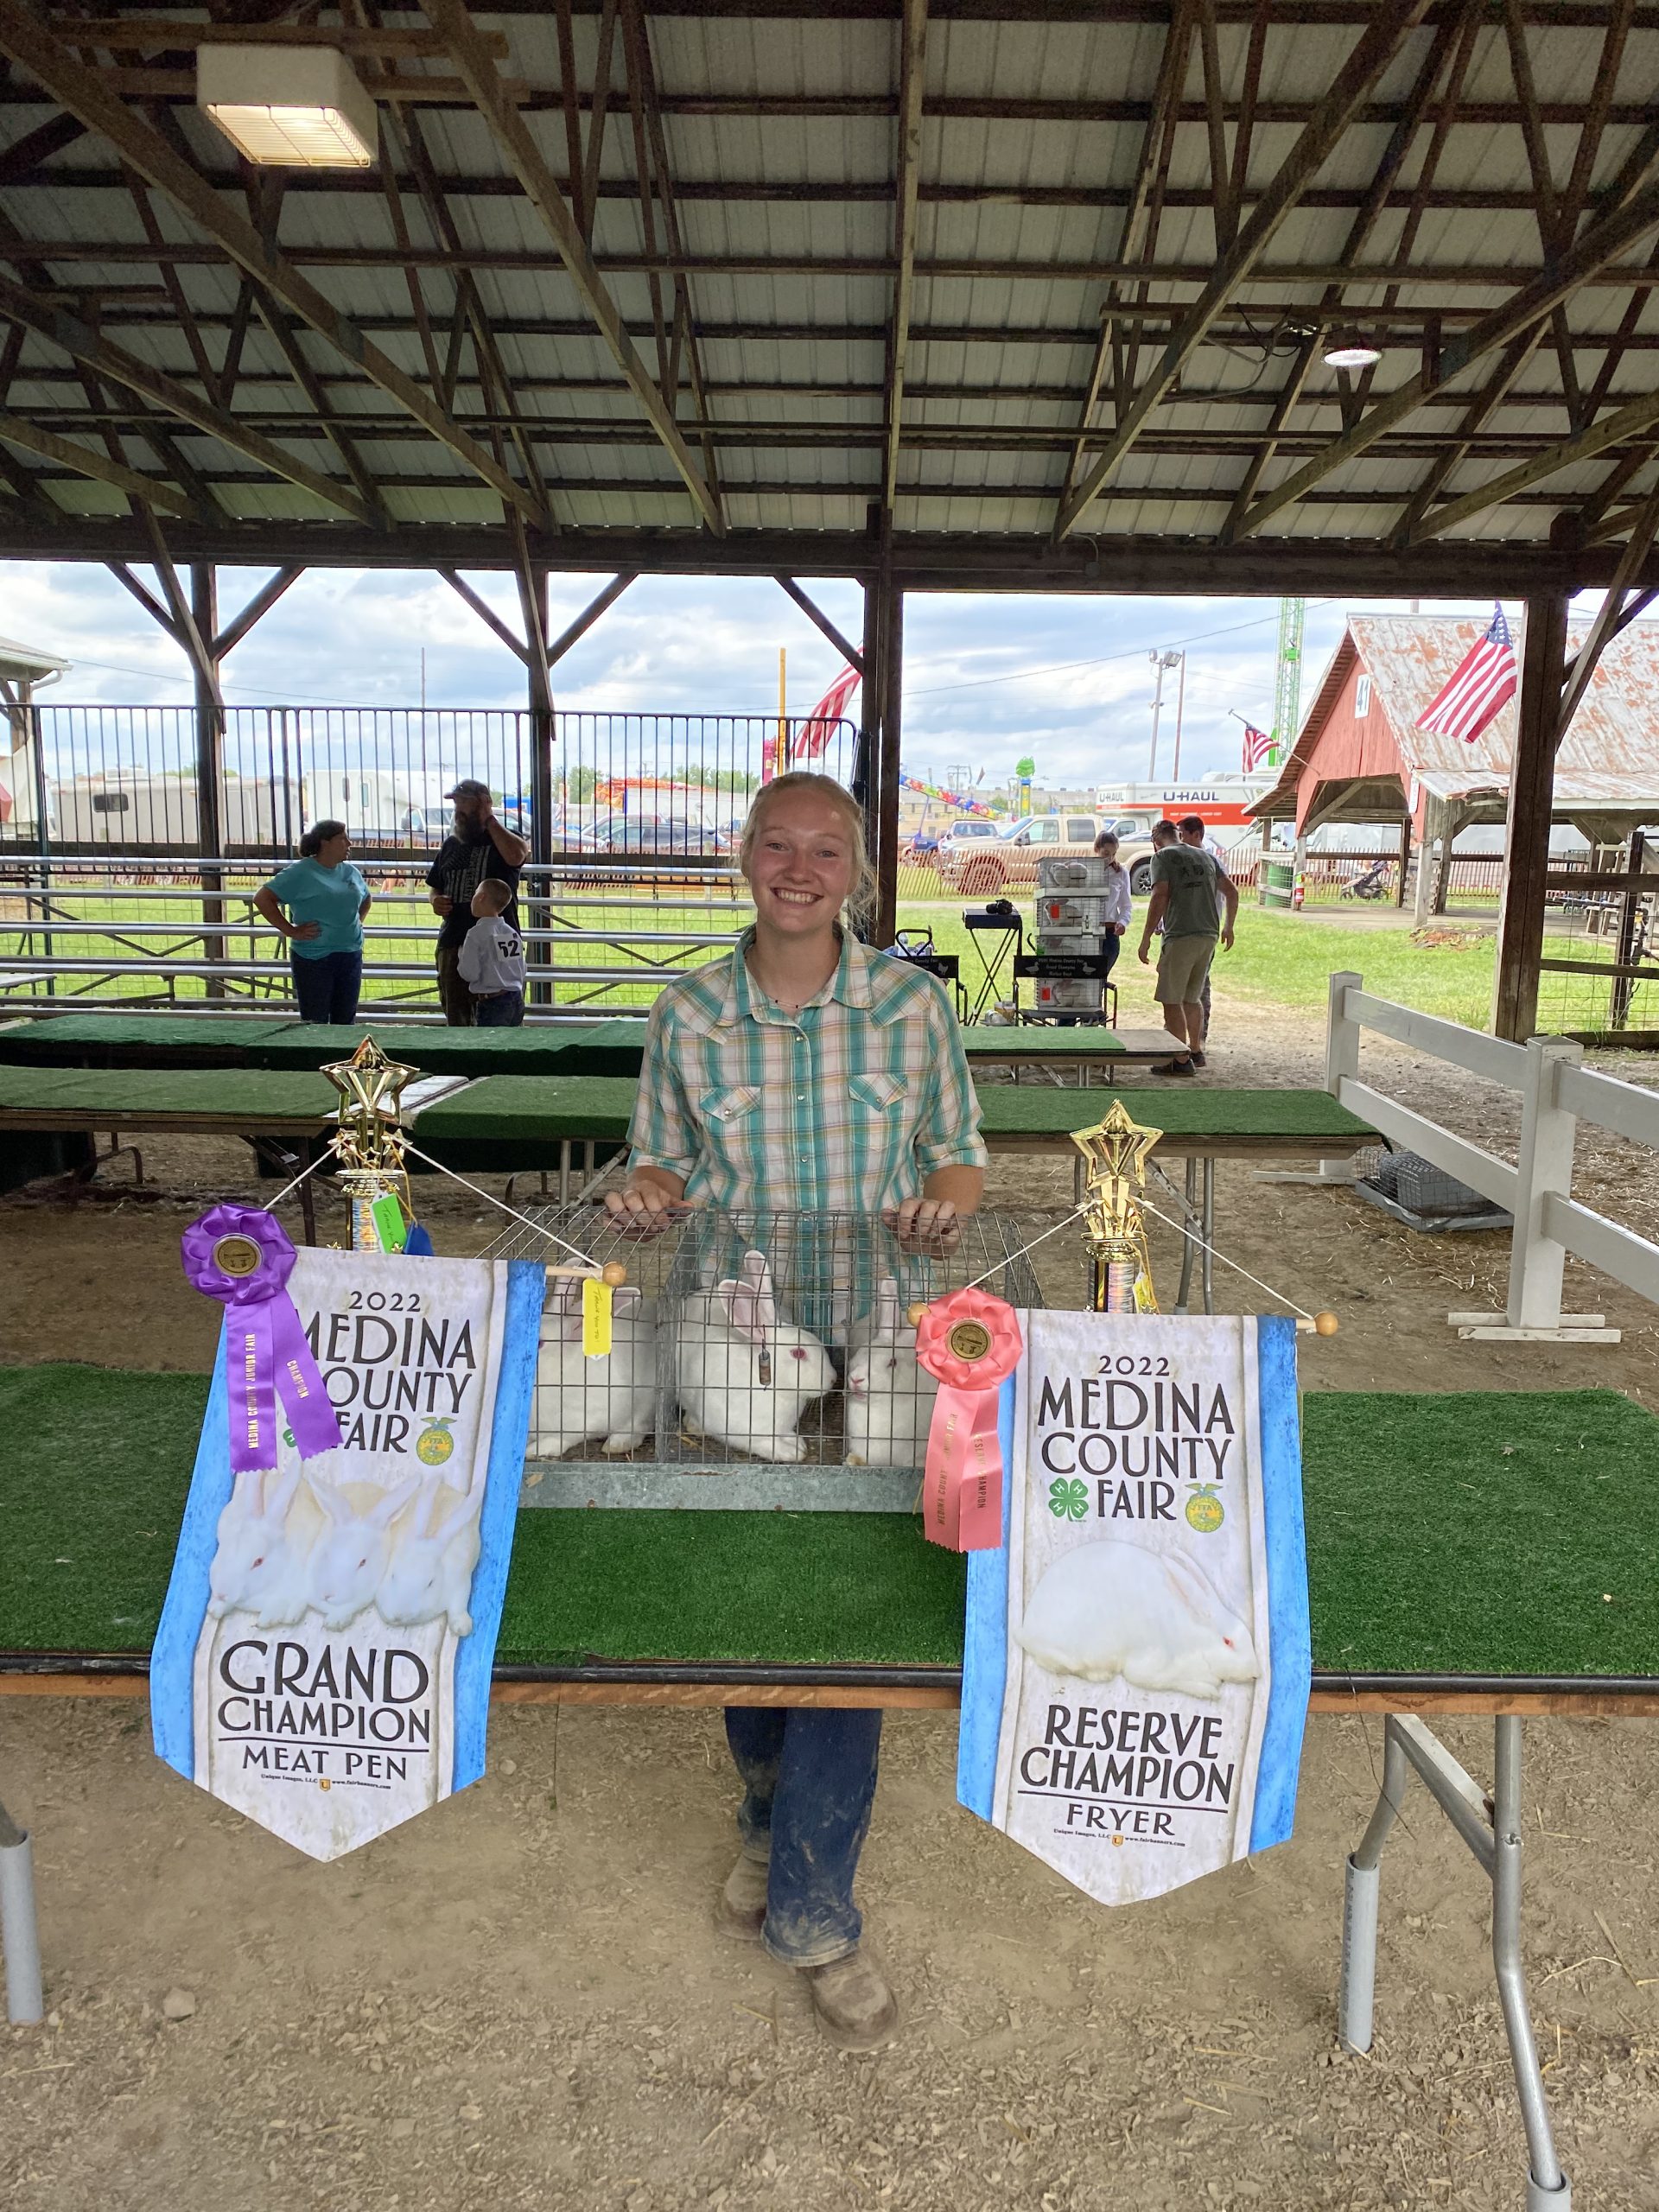 Grand Champion Meat Pen and Reserve Champion Fryer, 2022 Medina County Fair 2022